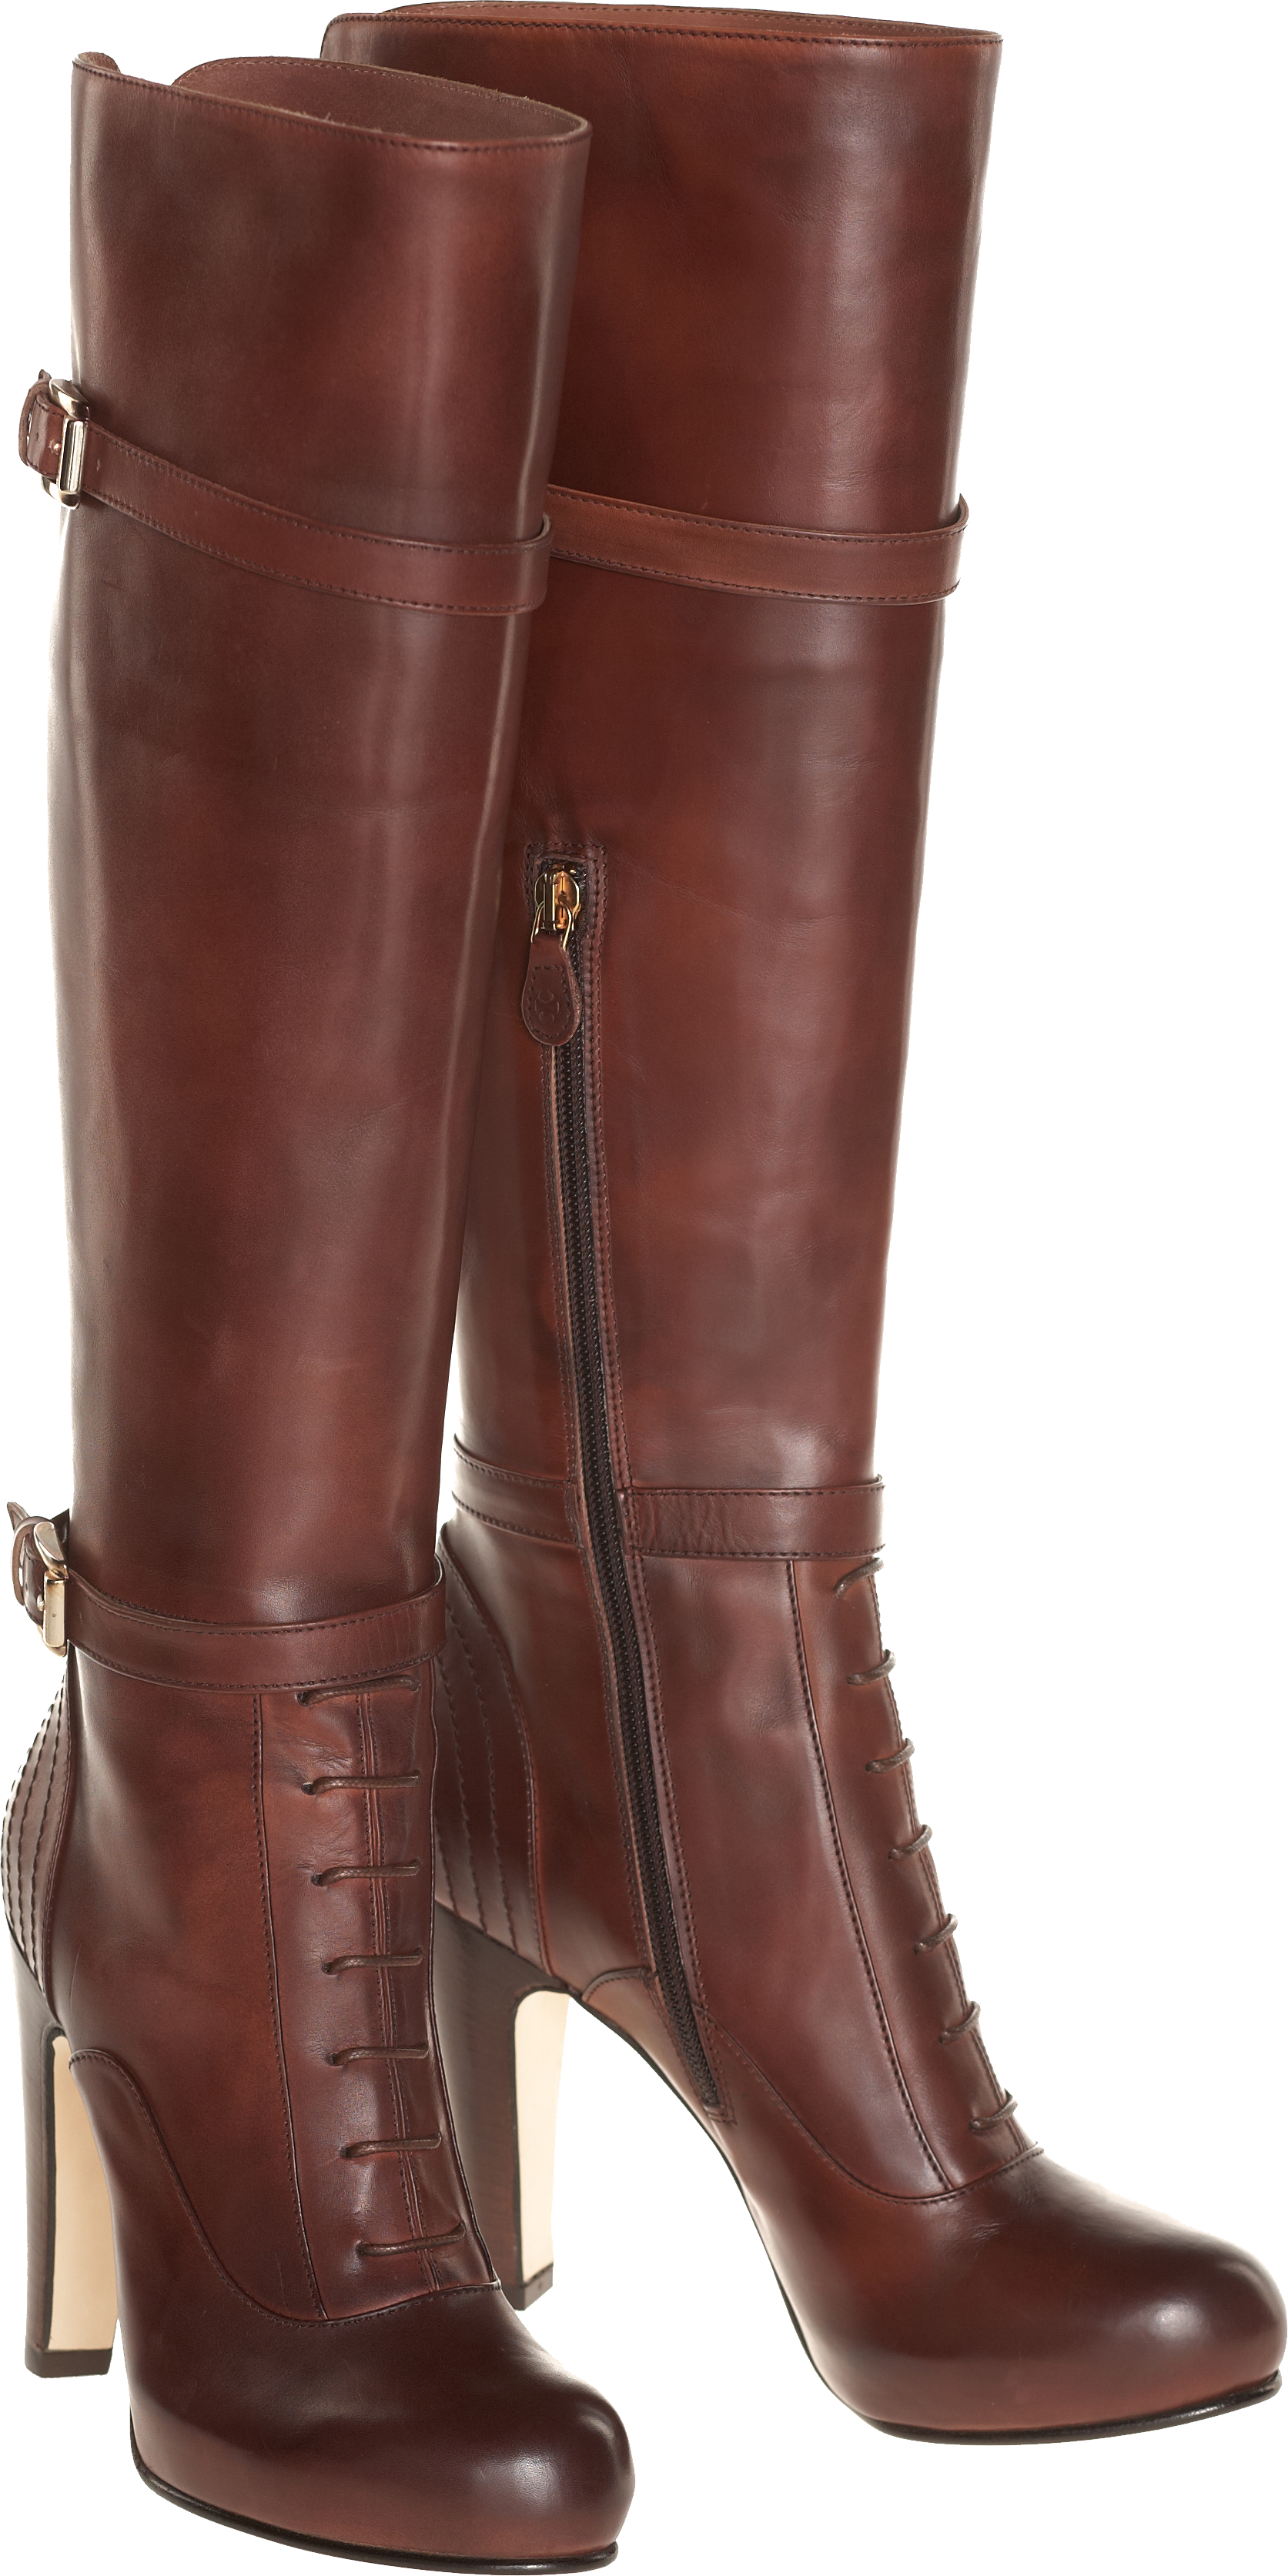 Women's boot made of genuine Chocolate leather PNG Image